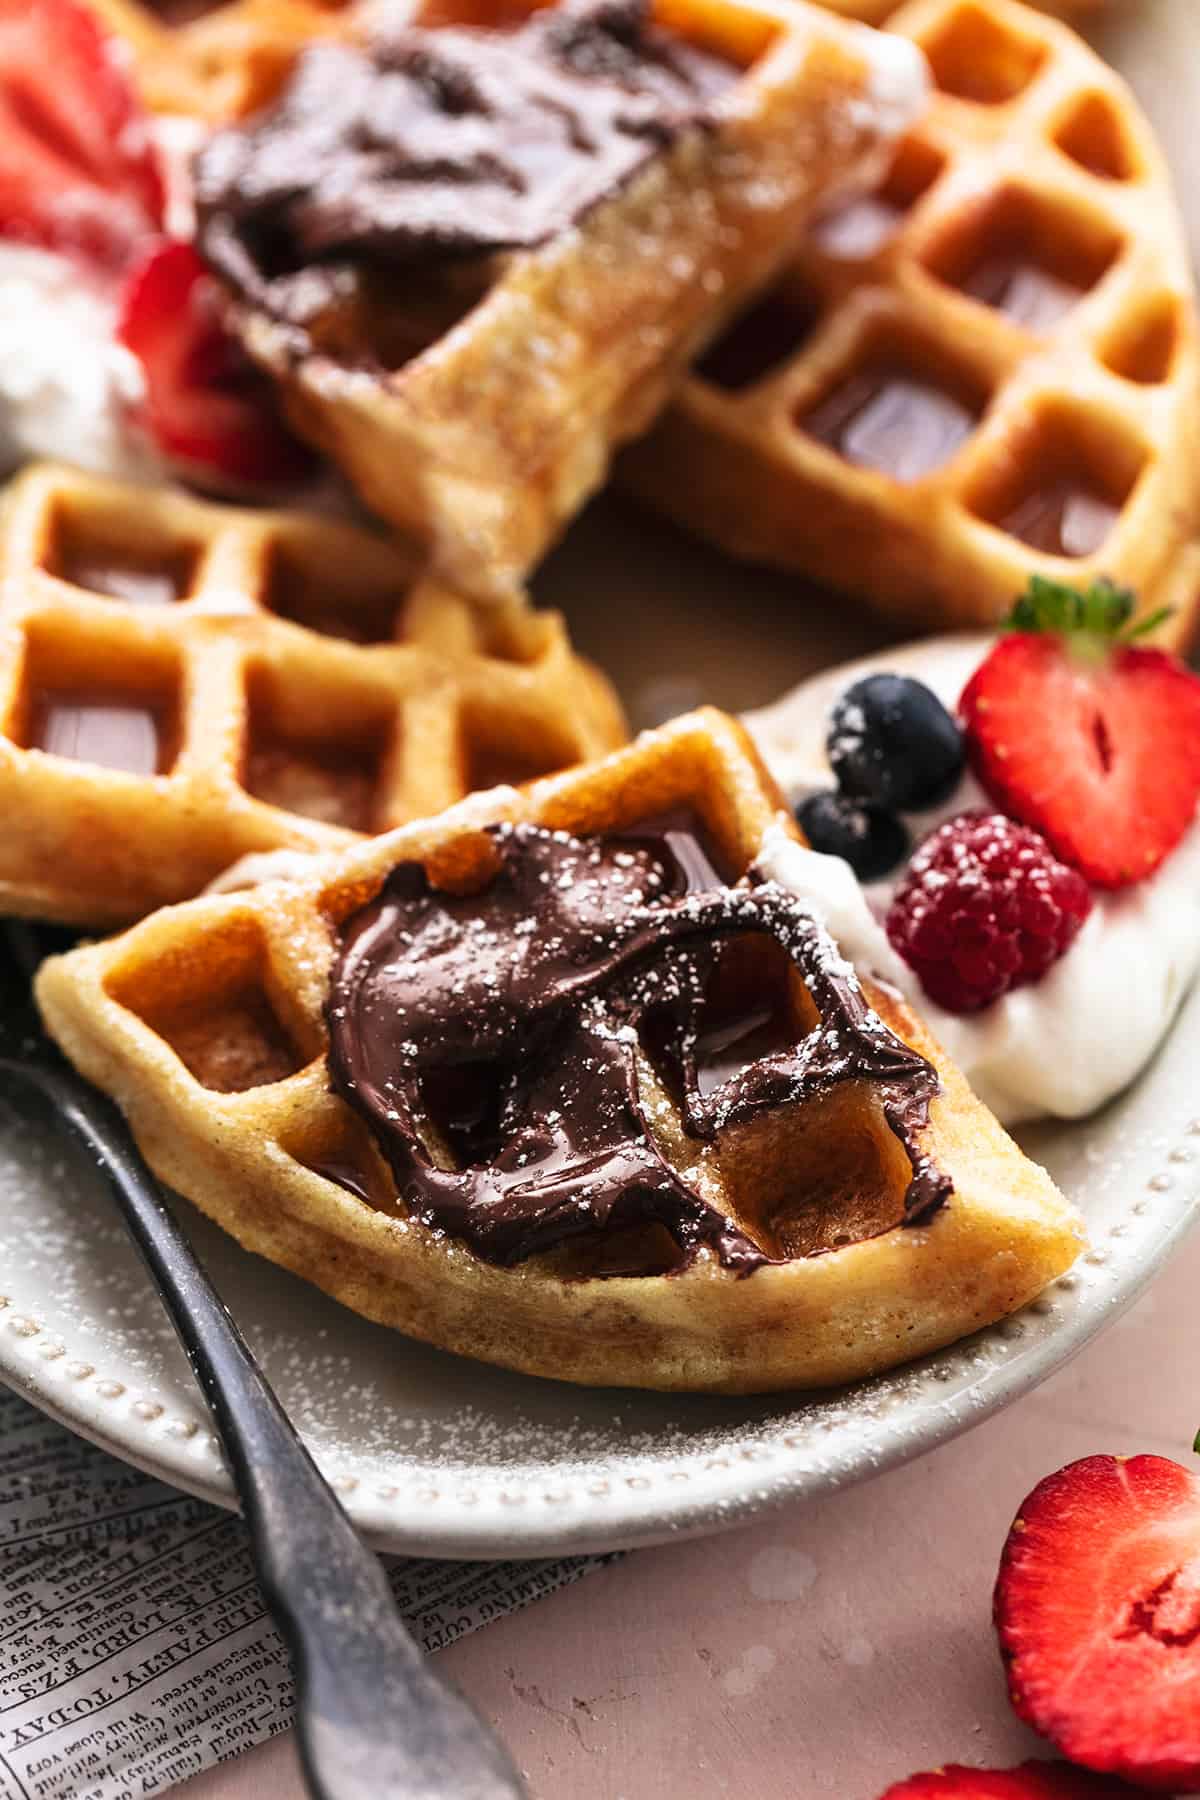 Meh: It's national waffle day.